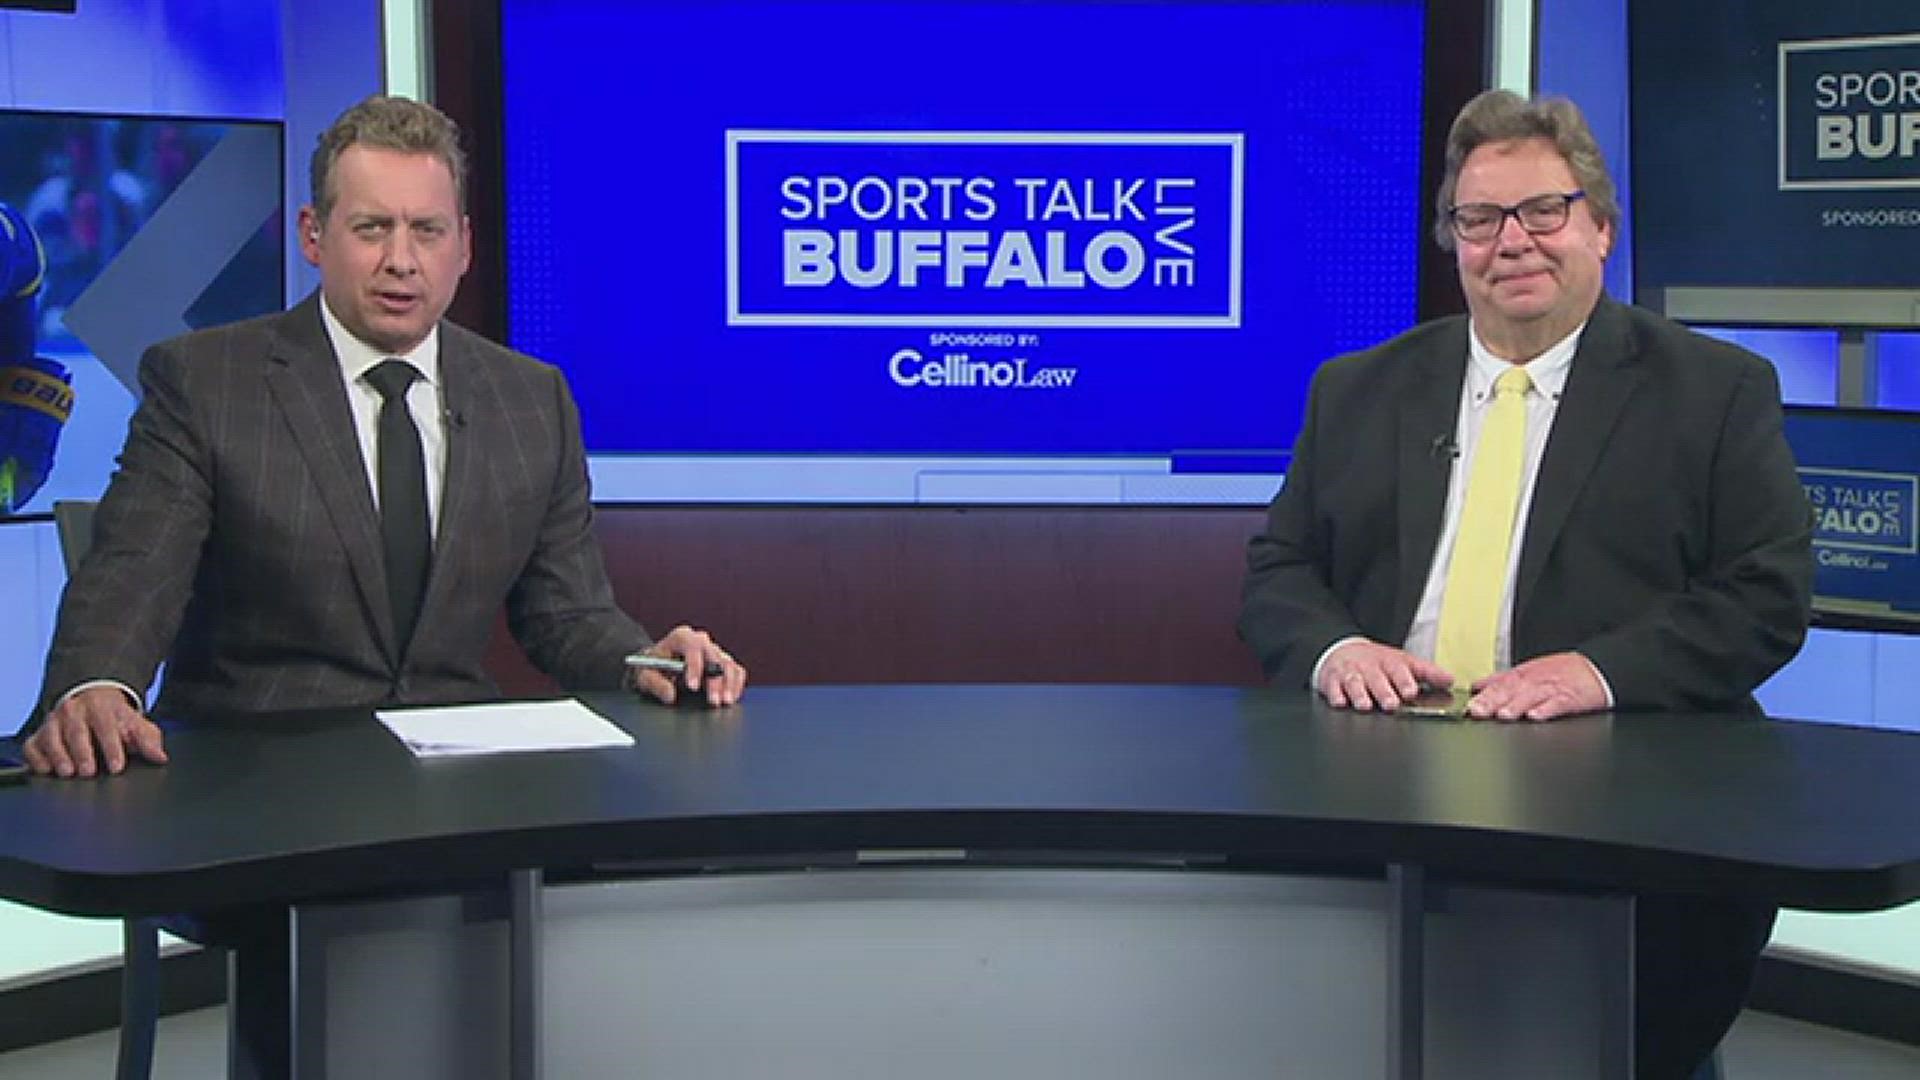 2 On Your Side's Adam Benigni and Paul Hamilton talk about the Sabres preps ahead of the home opener.